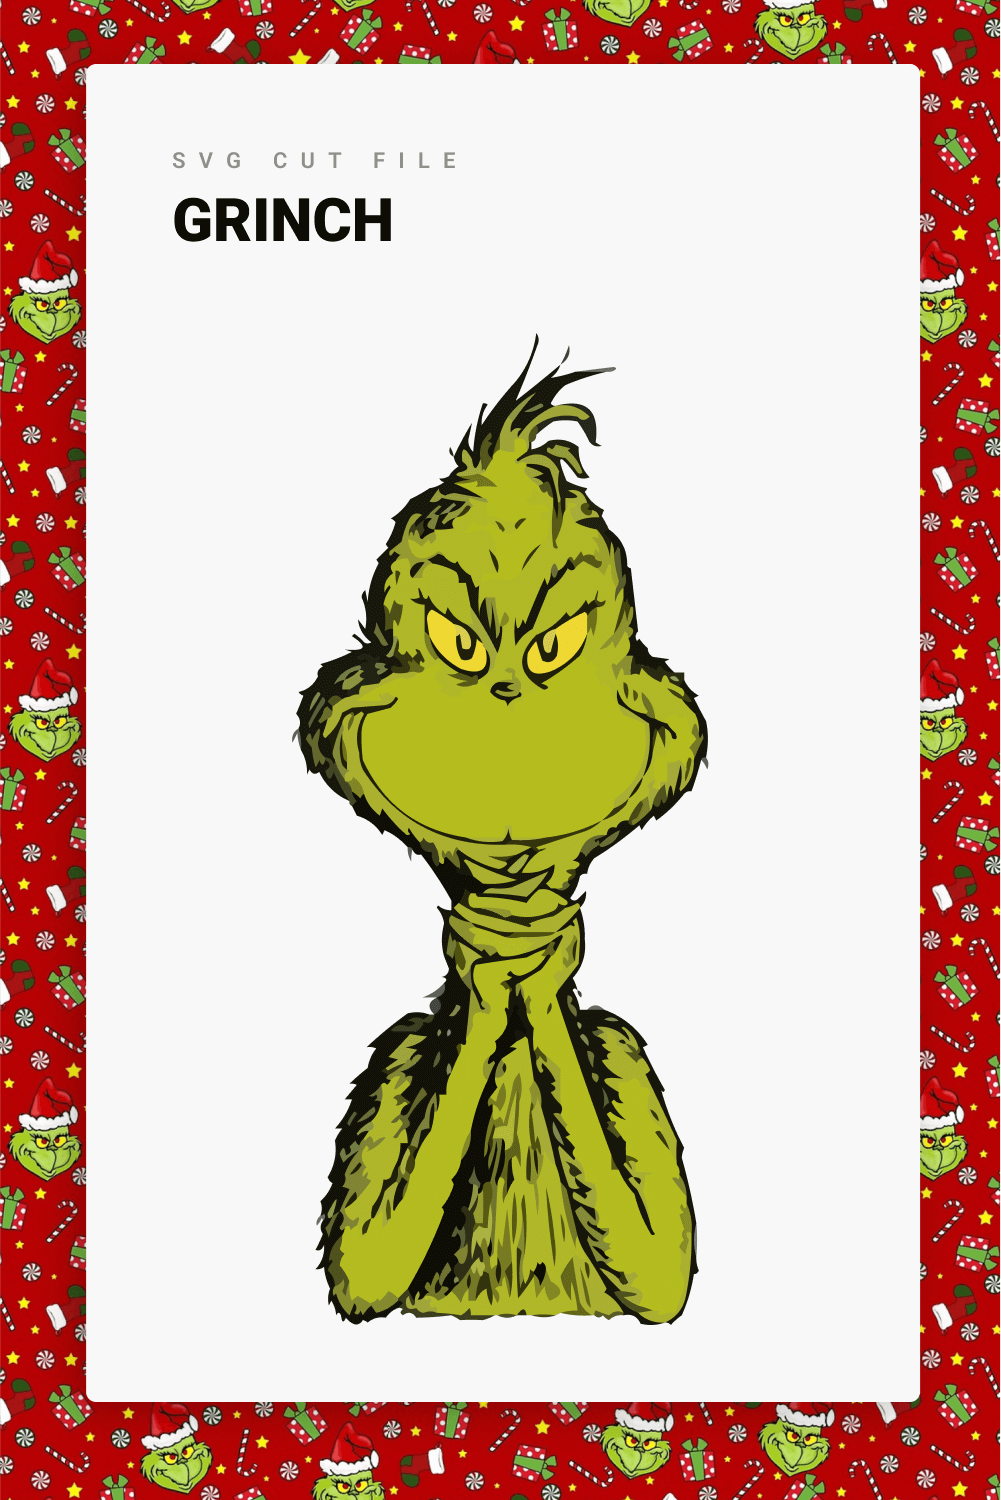 Grinch in Anticipation of Kidnapping Christmas with a Sinister Smile.